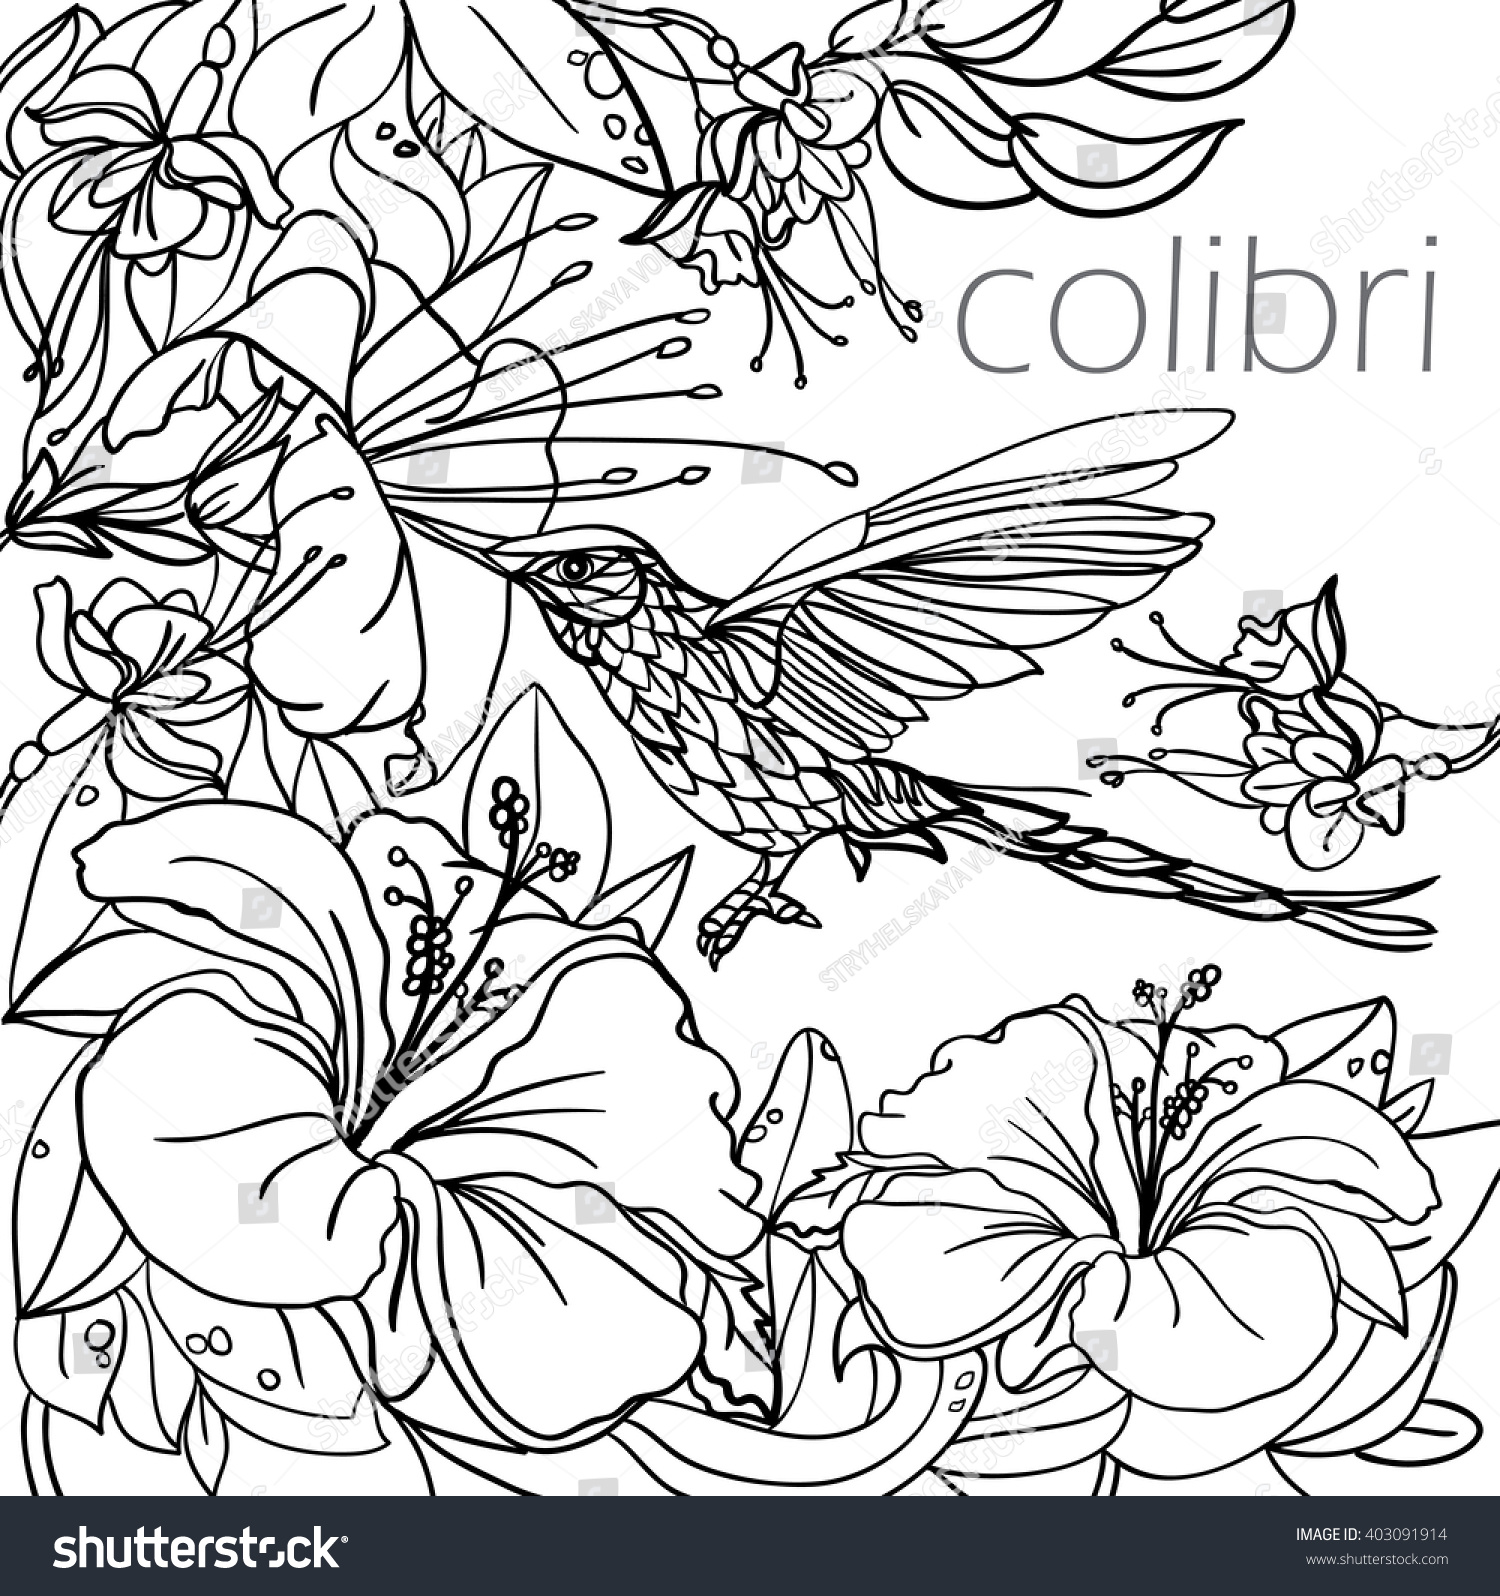 Coloring Pages Tropical Birds Flowers Leaves Stock Vector